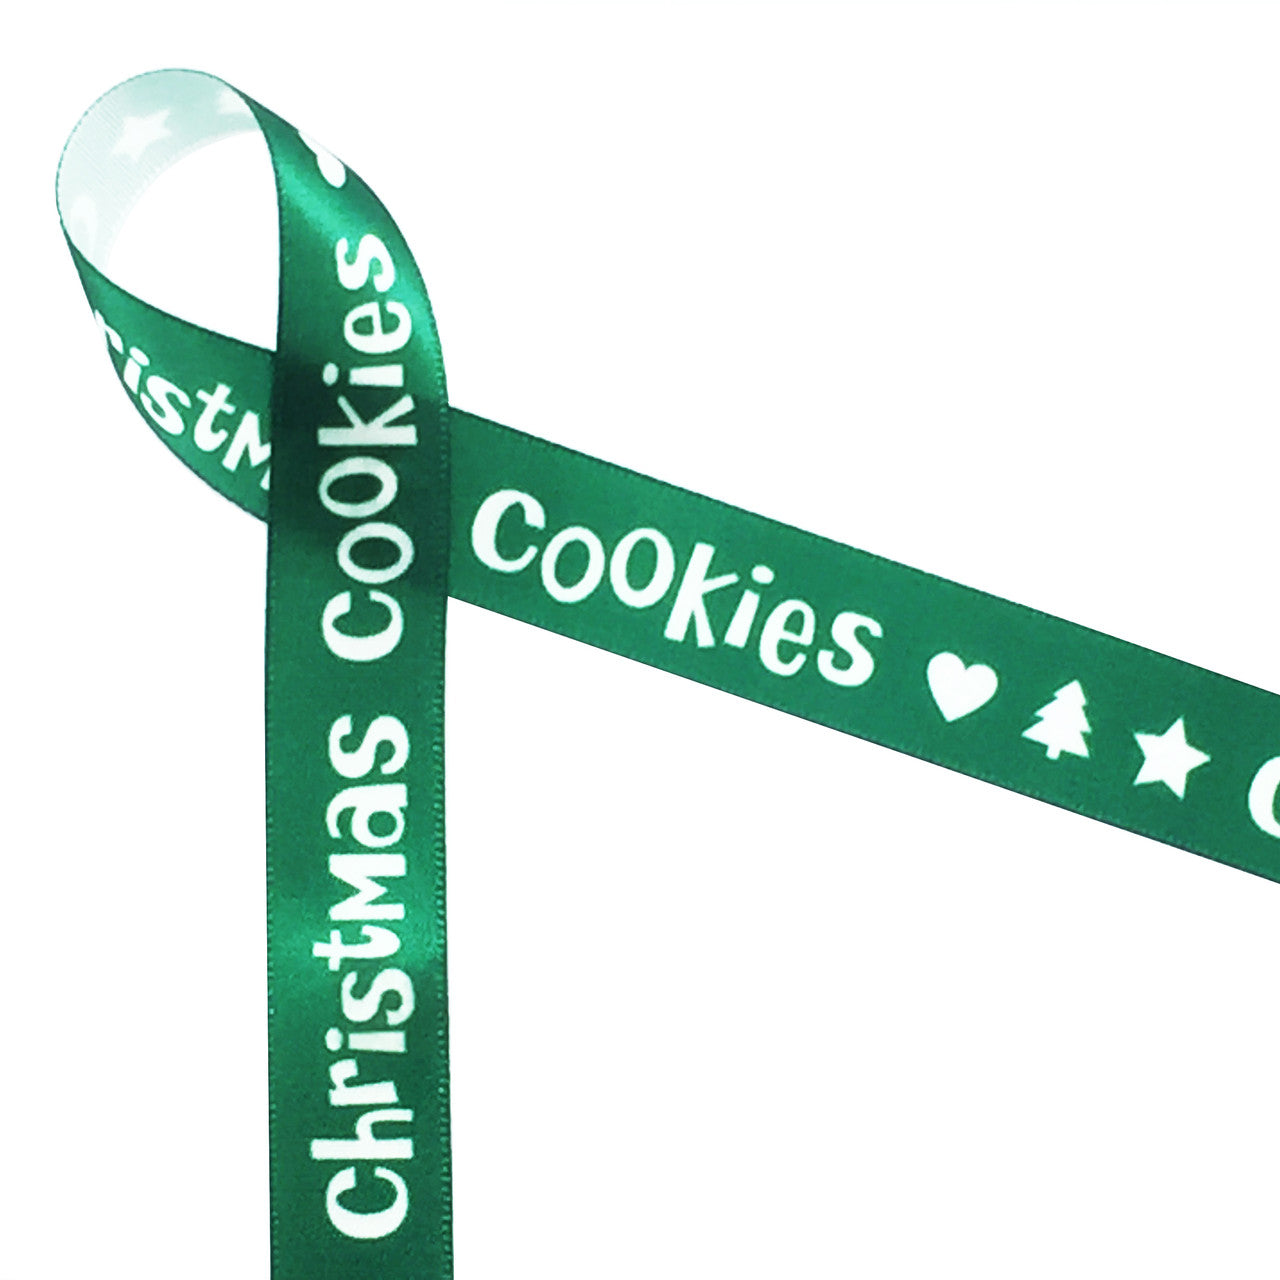 Christmas Cookies in white on green ribbon with hearts, trees and stars on 5/8" single face satin ribbon in 10 yard spools.